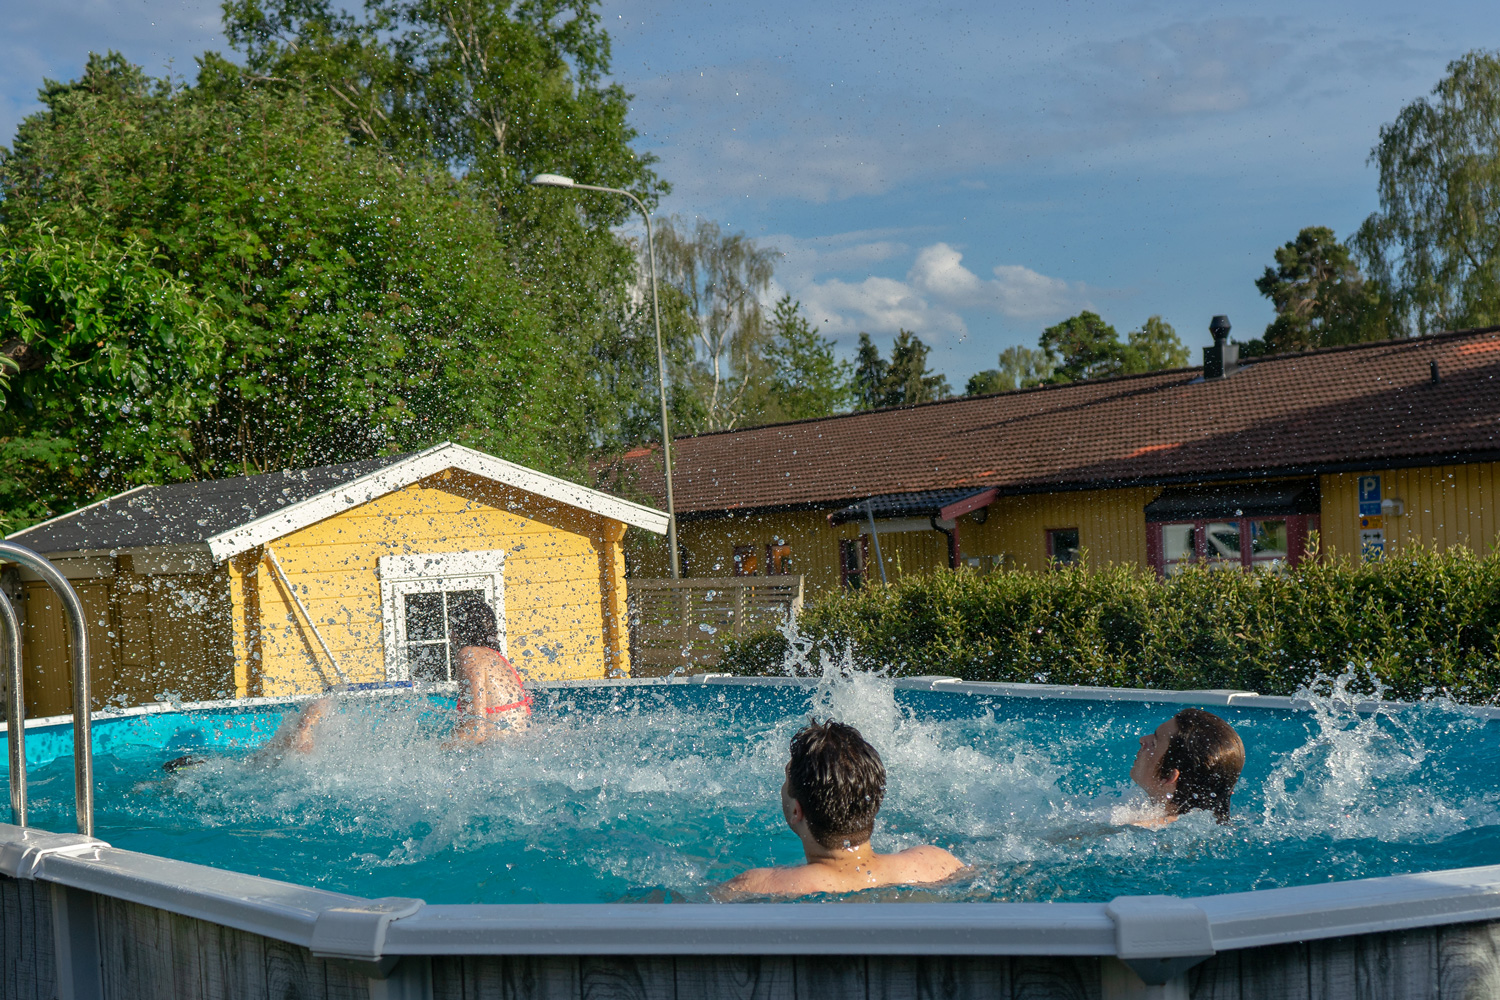 The guys are splashing water on the girls in the pool. Circa Stockholm